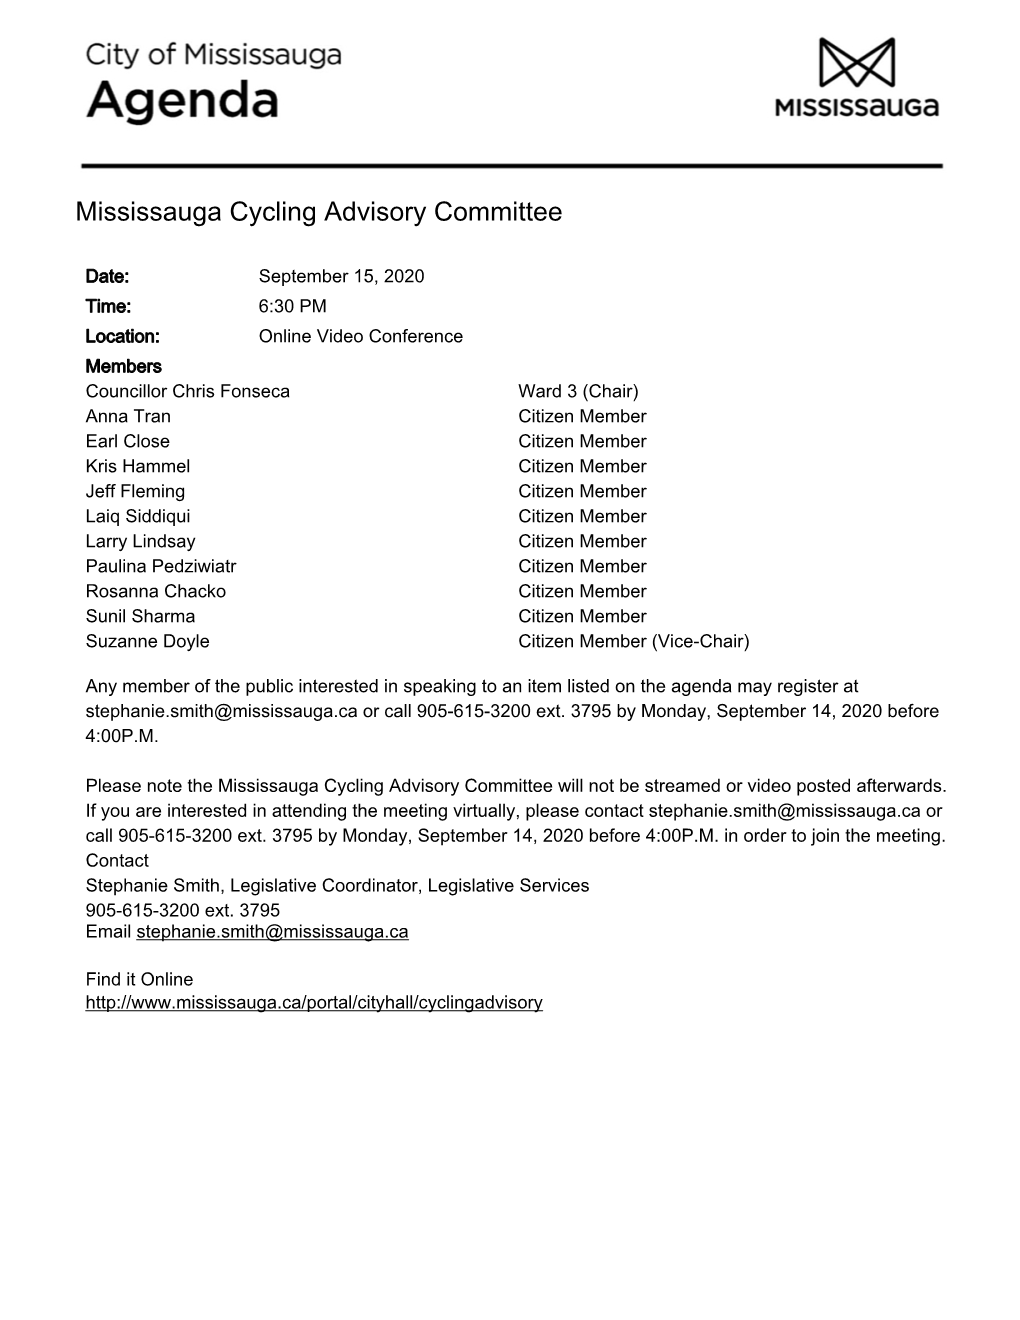 Mississauga Cycling Advisory Committee